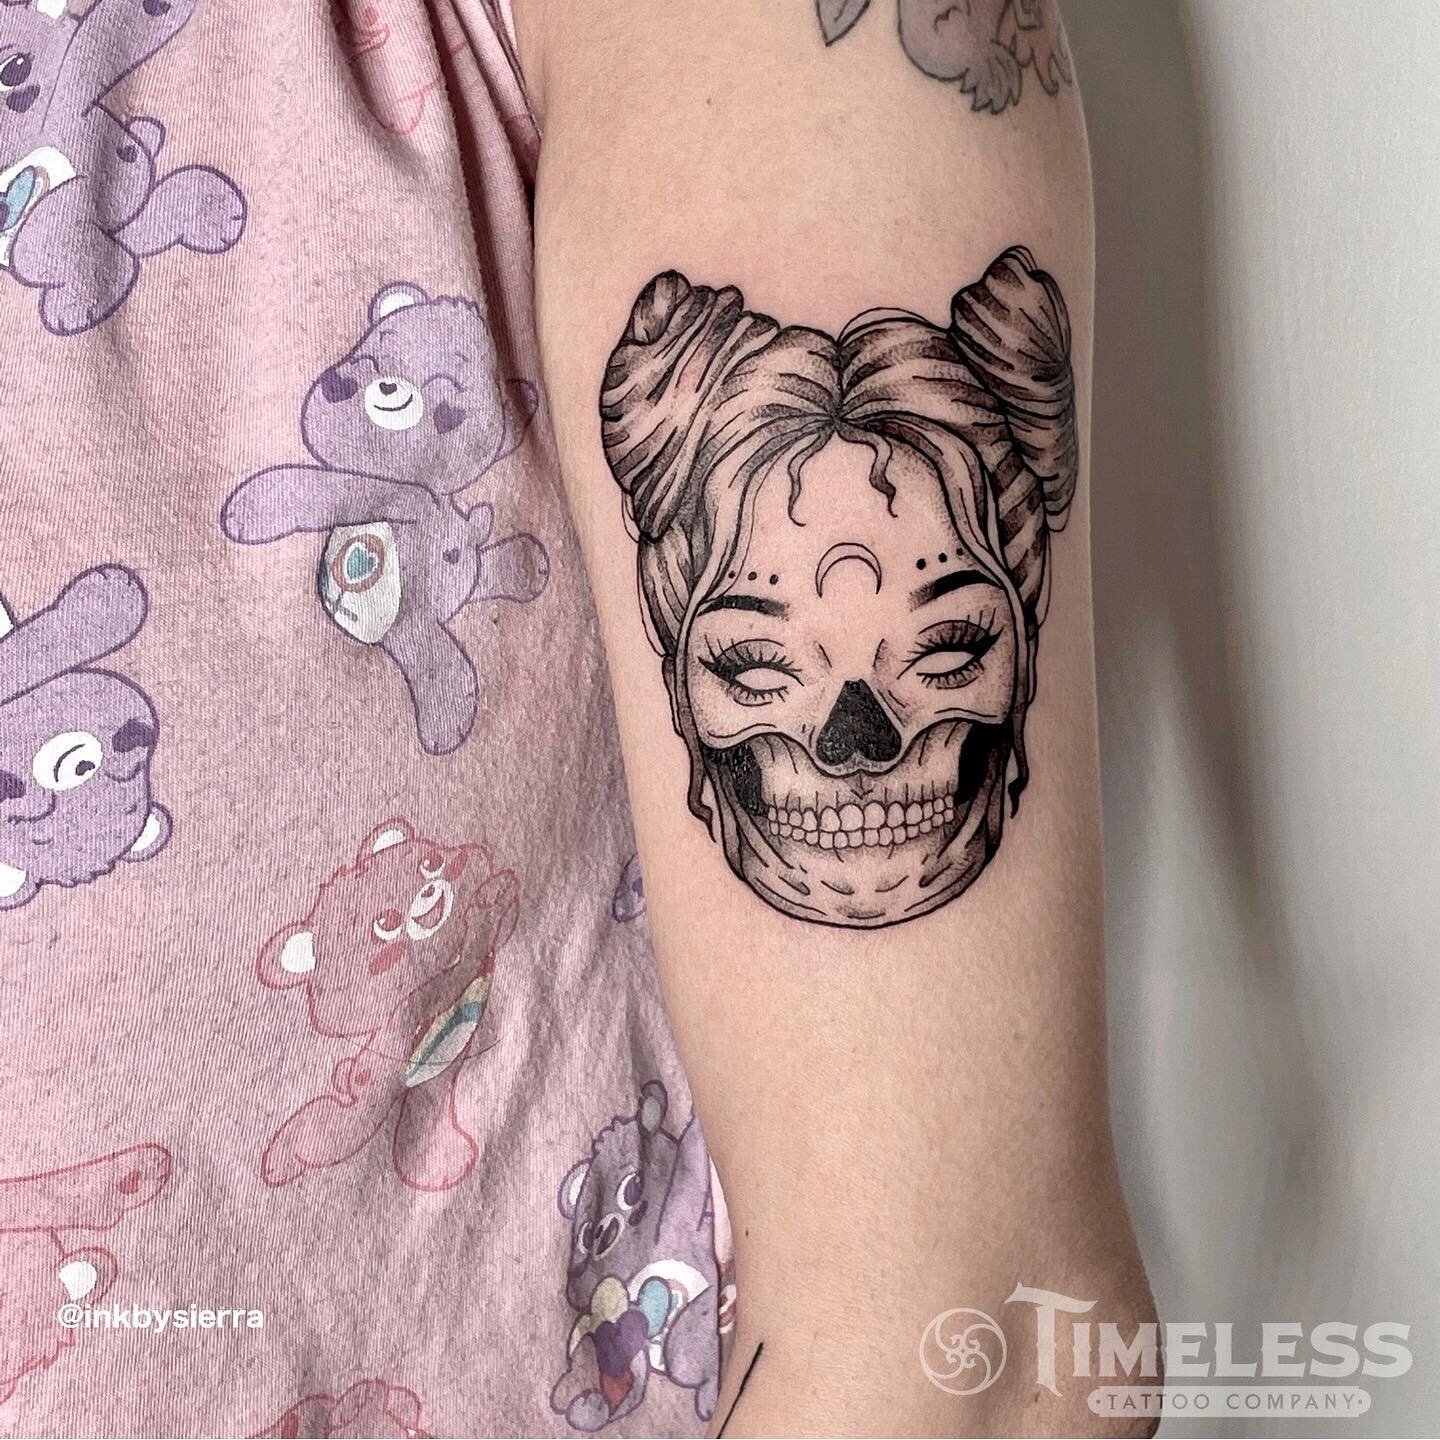 Skull Lady head for Lisa. Huge thank you to @mommy_4girlz for trusting me with this piece. I would love to do more lady head pieces! 💕☠️

#ladyfacetattoo #blackandgreytattoo #artistsoninstagram #torontotattoo
#tattoo #inked #tattooartist #timelessta